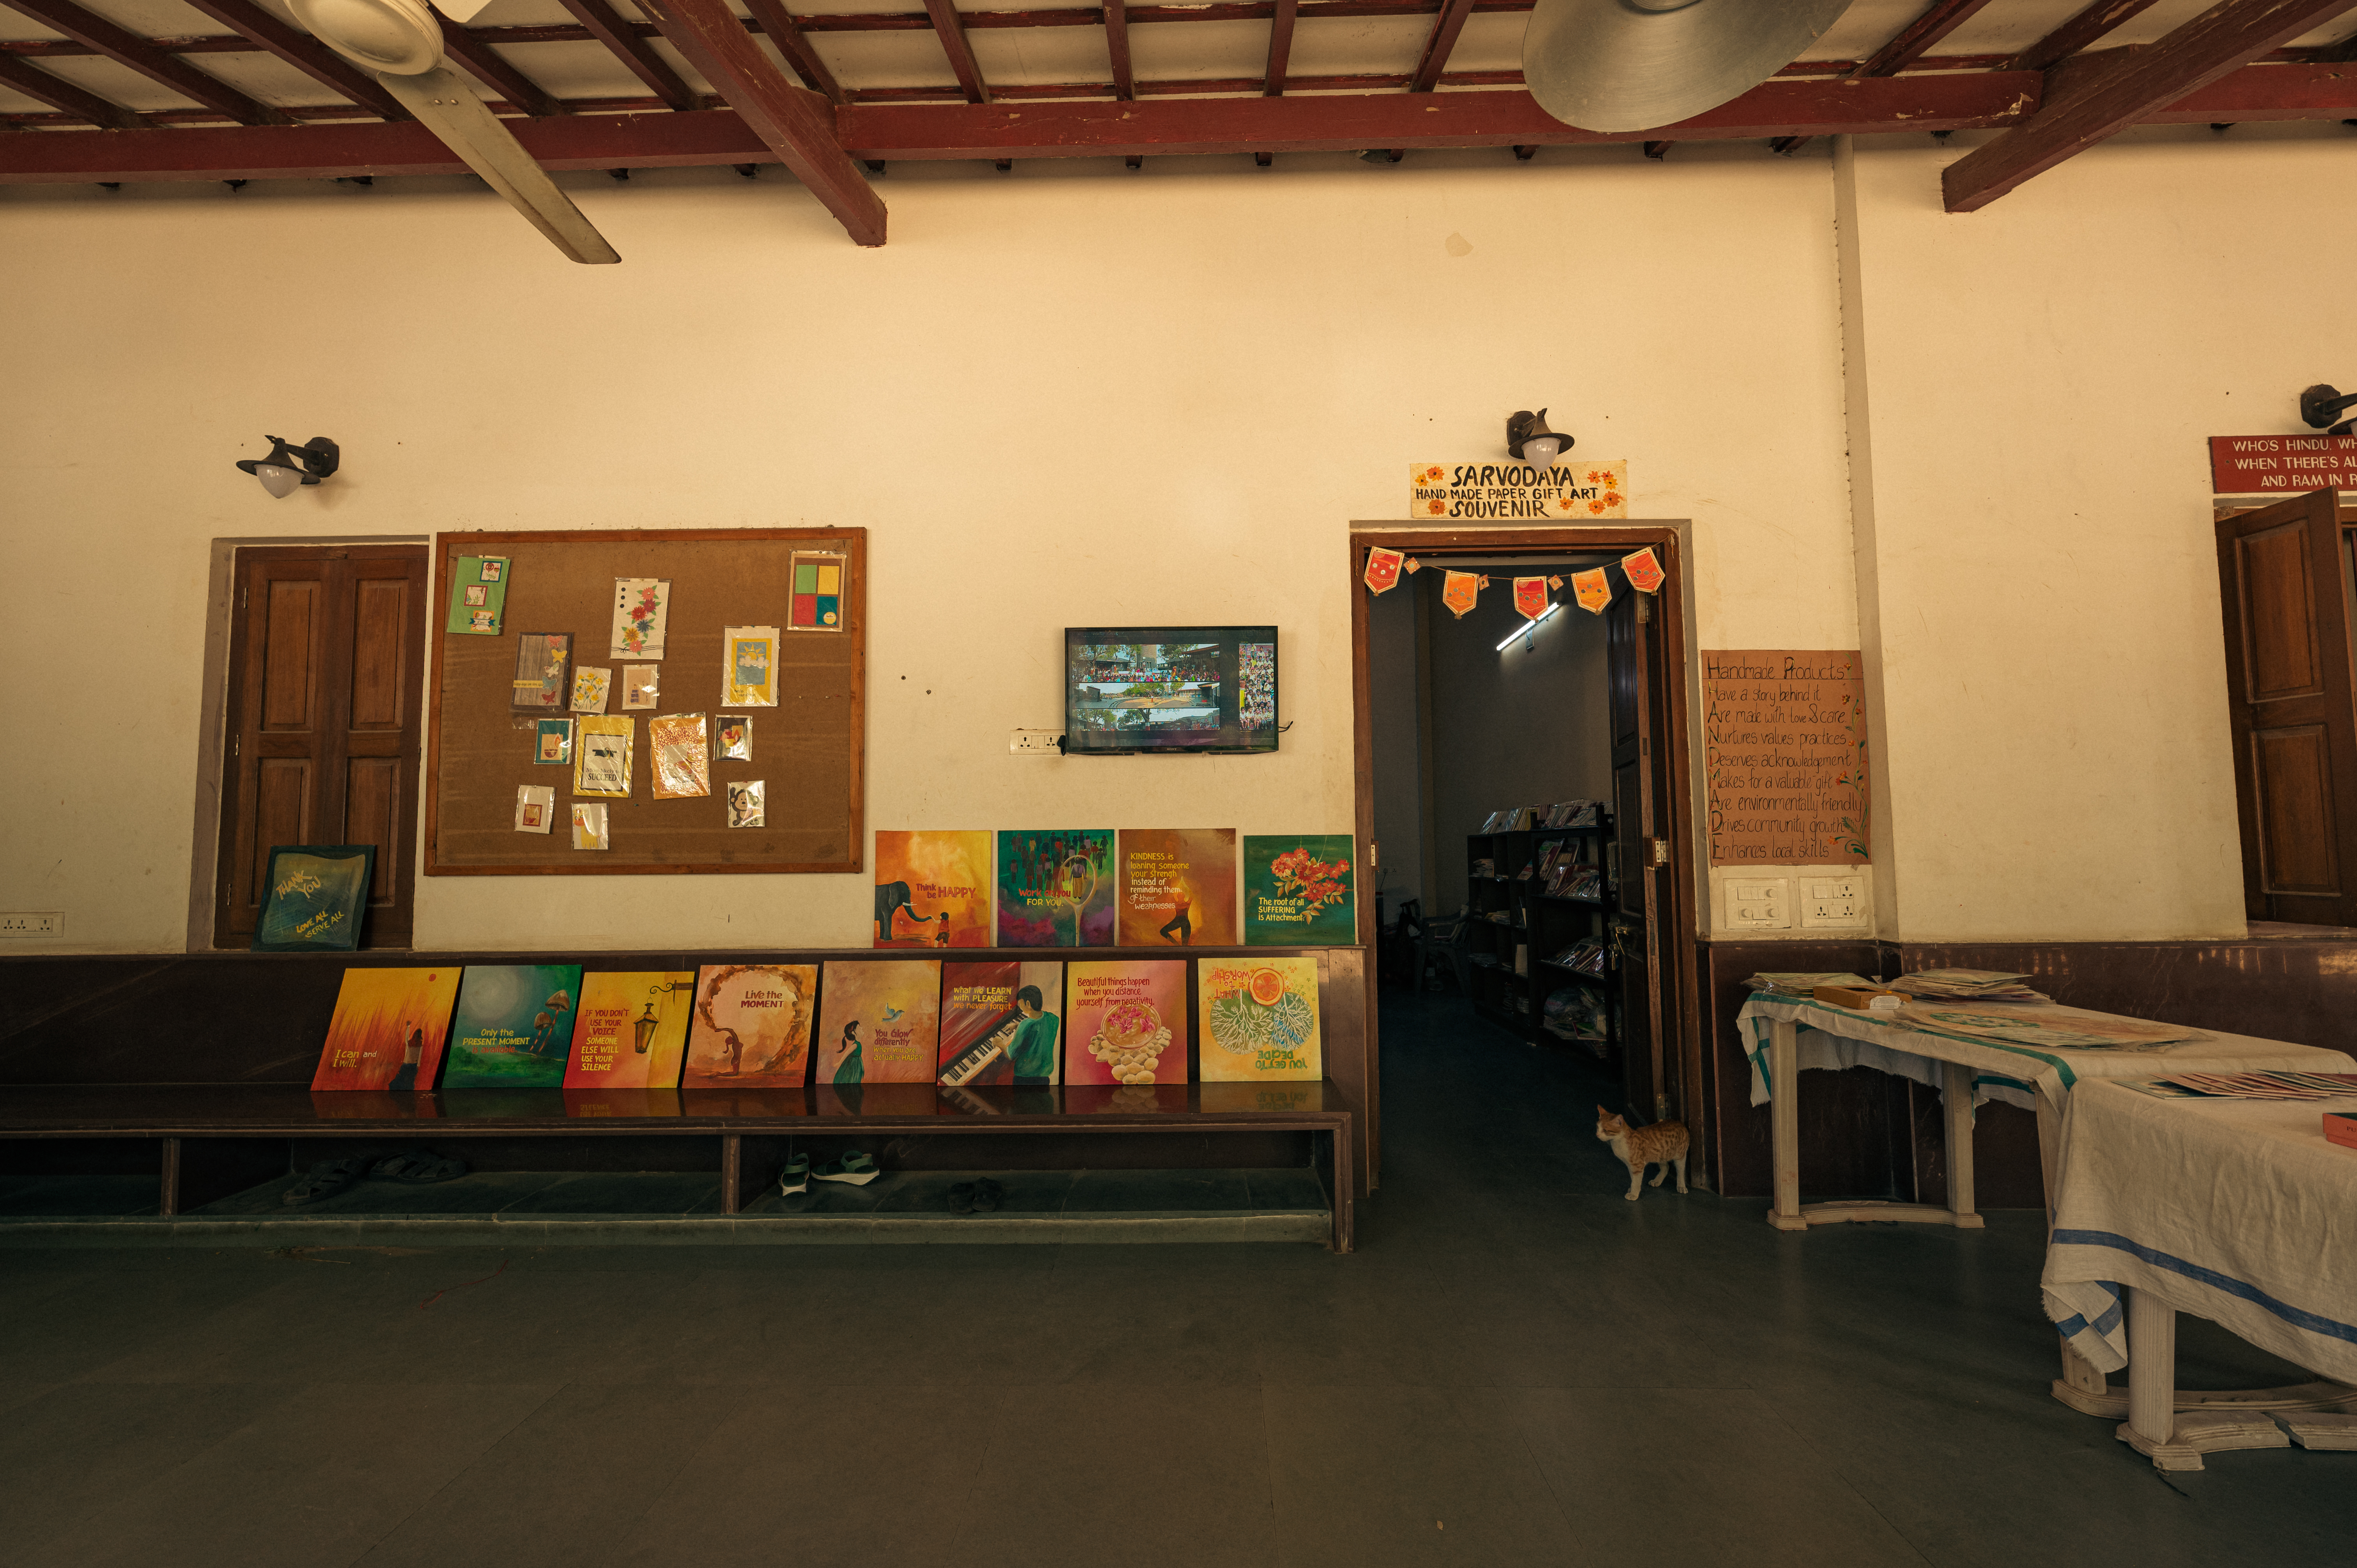 The artshop that teaches the values of self reliance in Sabarmati Ashram